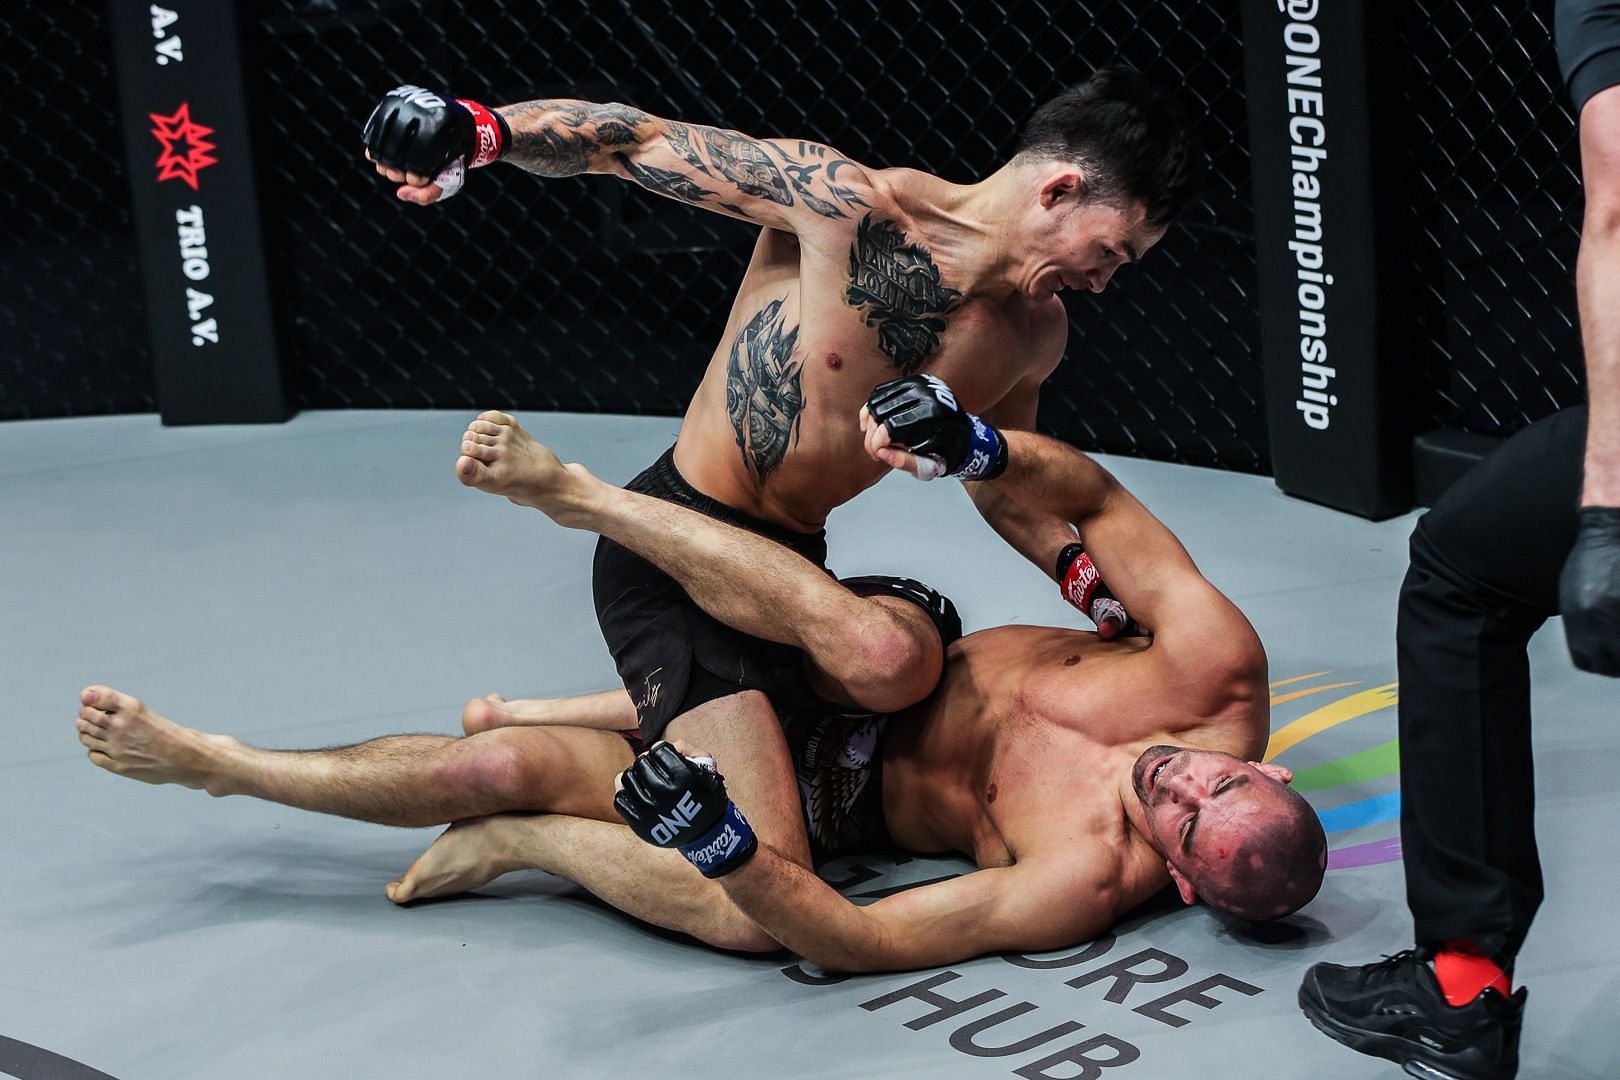 Thanh Le (left) defended his title versus Garry Tonon (right). [Photo: ONE Championship]